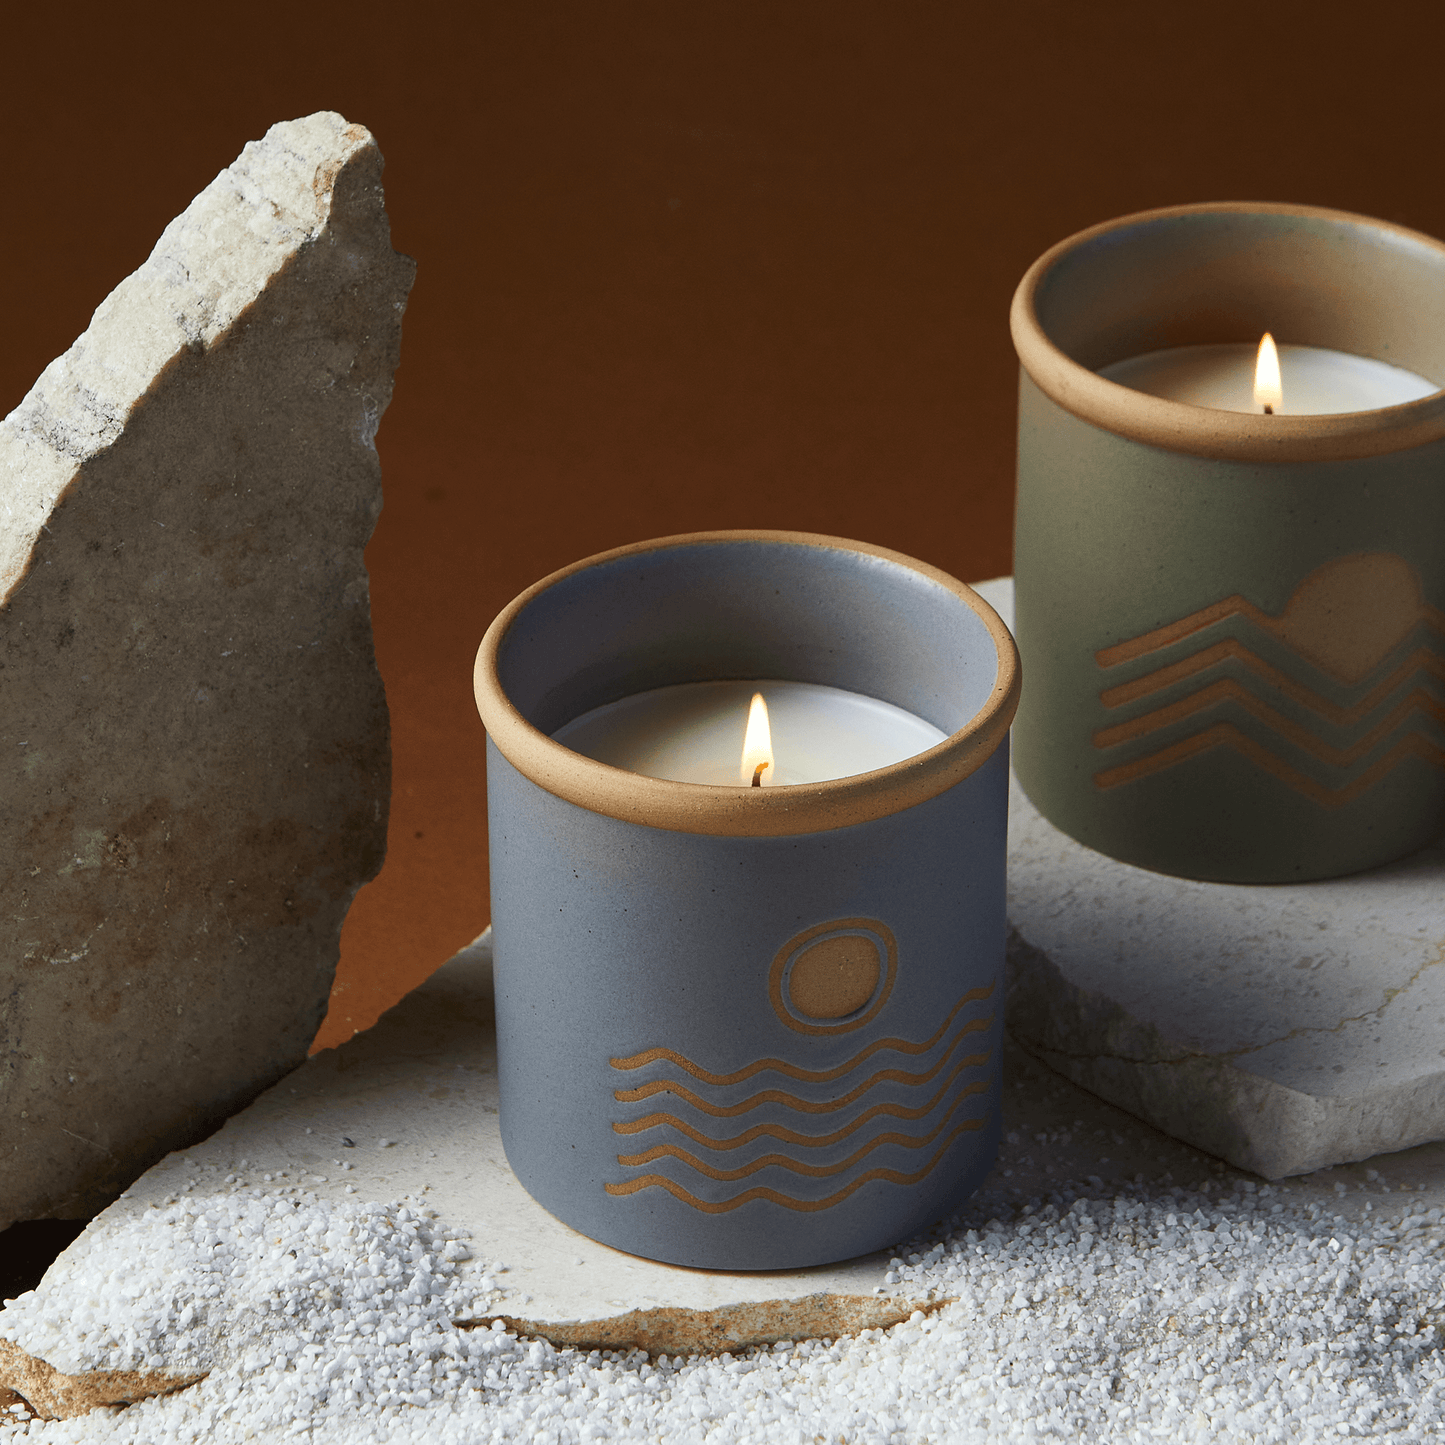  8 oz blue ceramic vessel with ocean design and a cork lid (also containing the same design); pictured lit with other candles